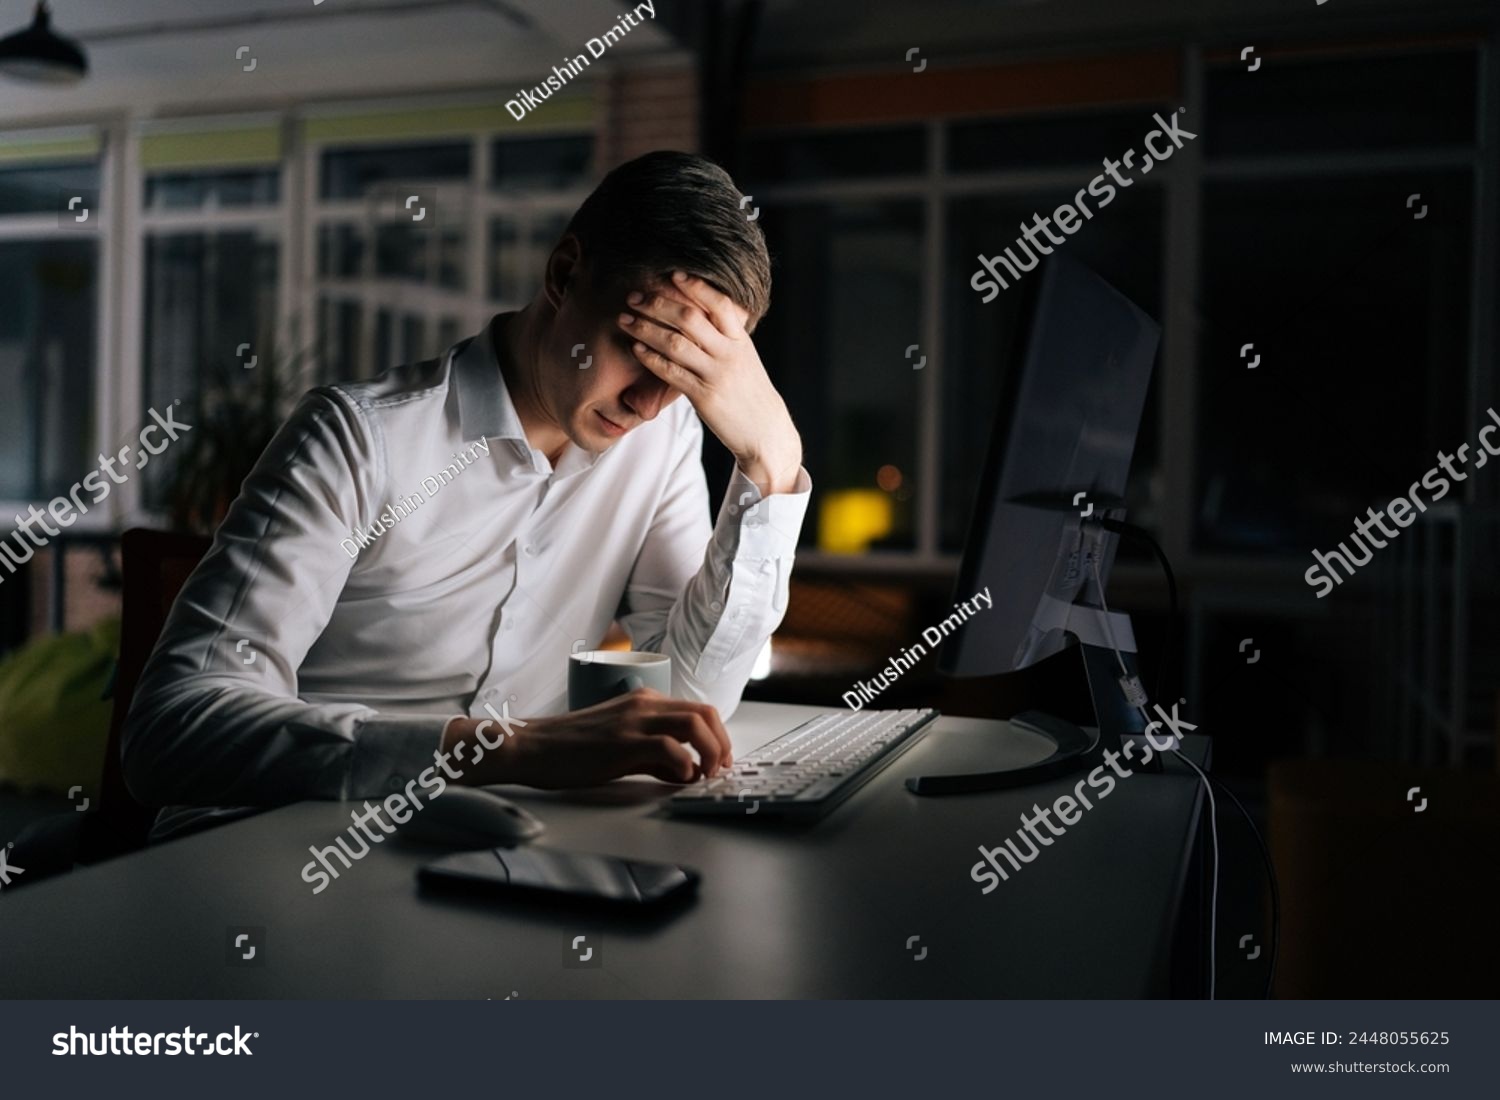 Tired male office worker working late at night, using desktop computer and touching forehead. Exhausted businessman working on laptop computer until night. Concept of stressful life and deadline. #2448055625